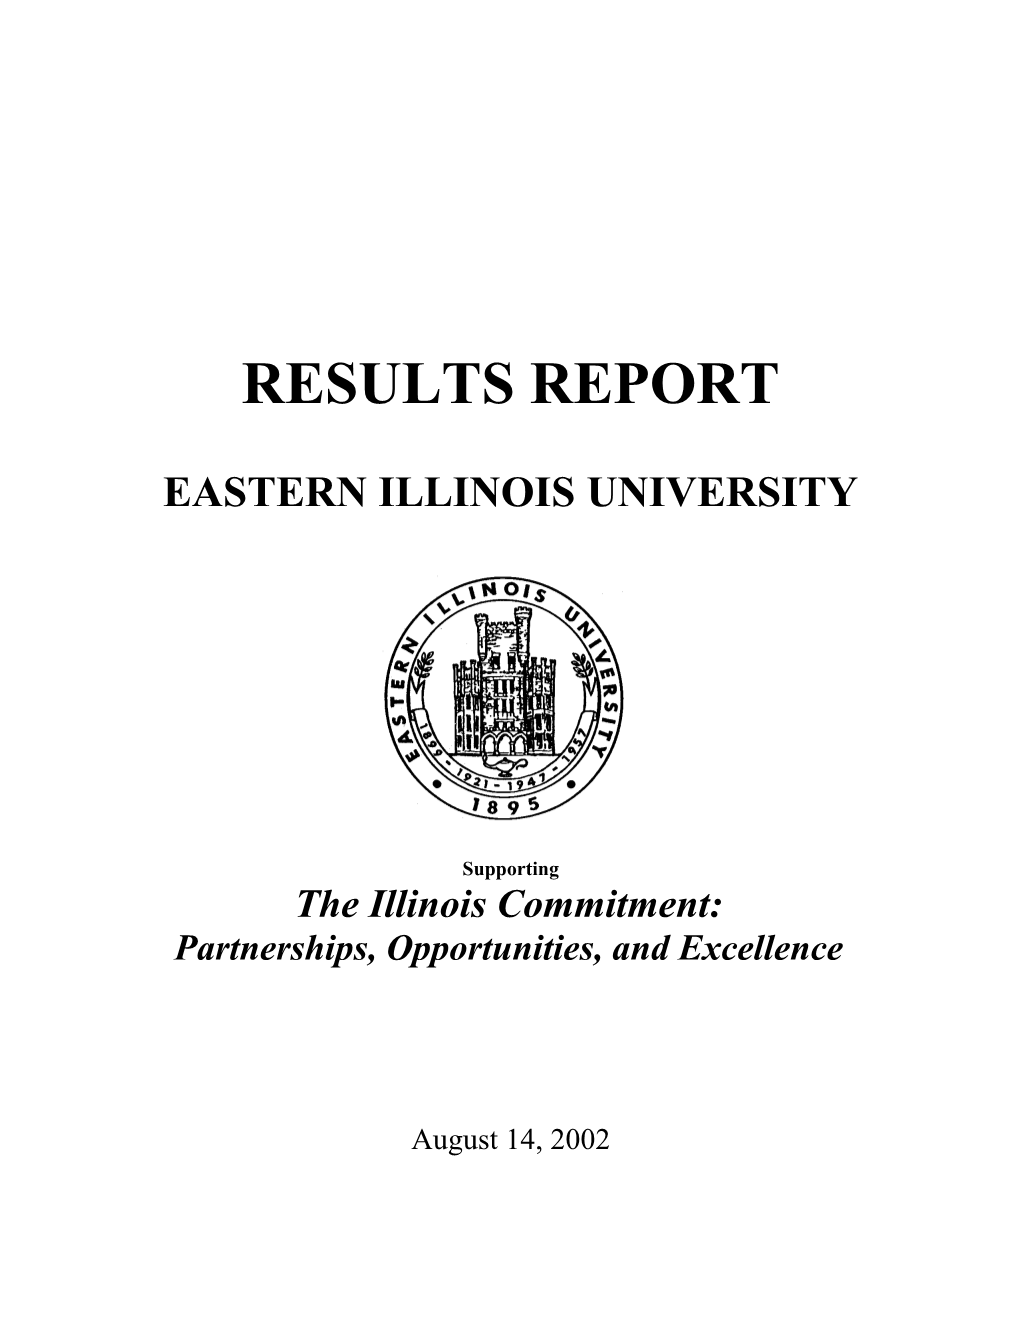 1 Higher Education Will Help Illinois Business and Industry Sustain Strong Economic Growth